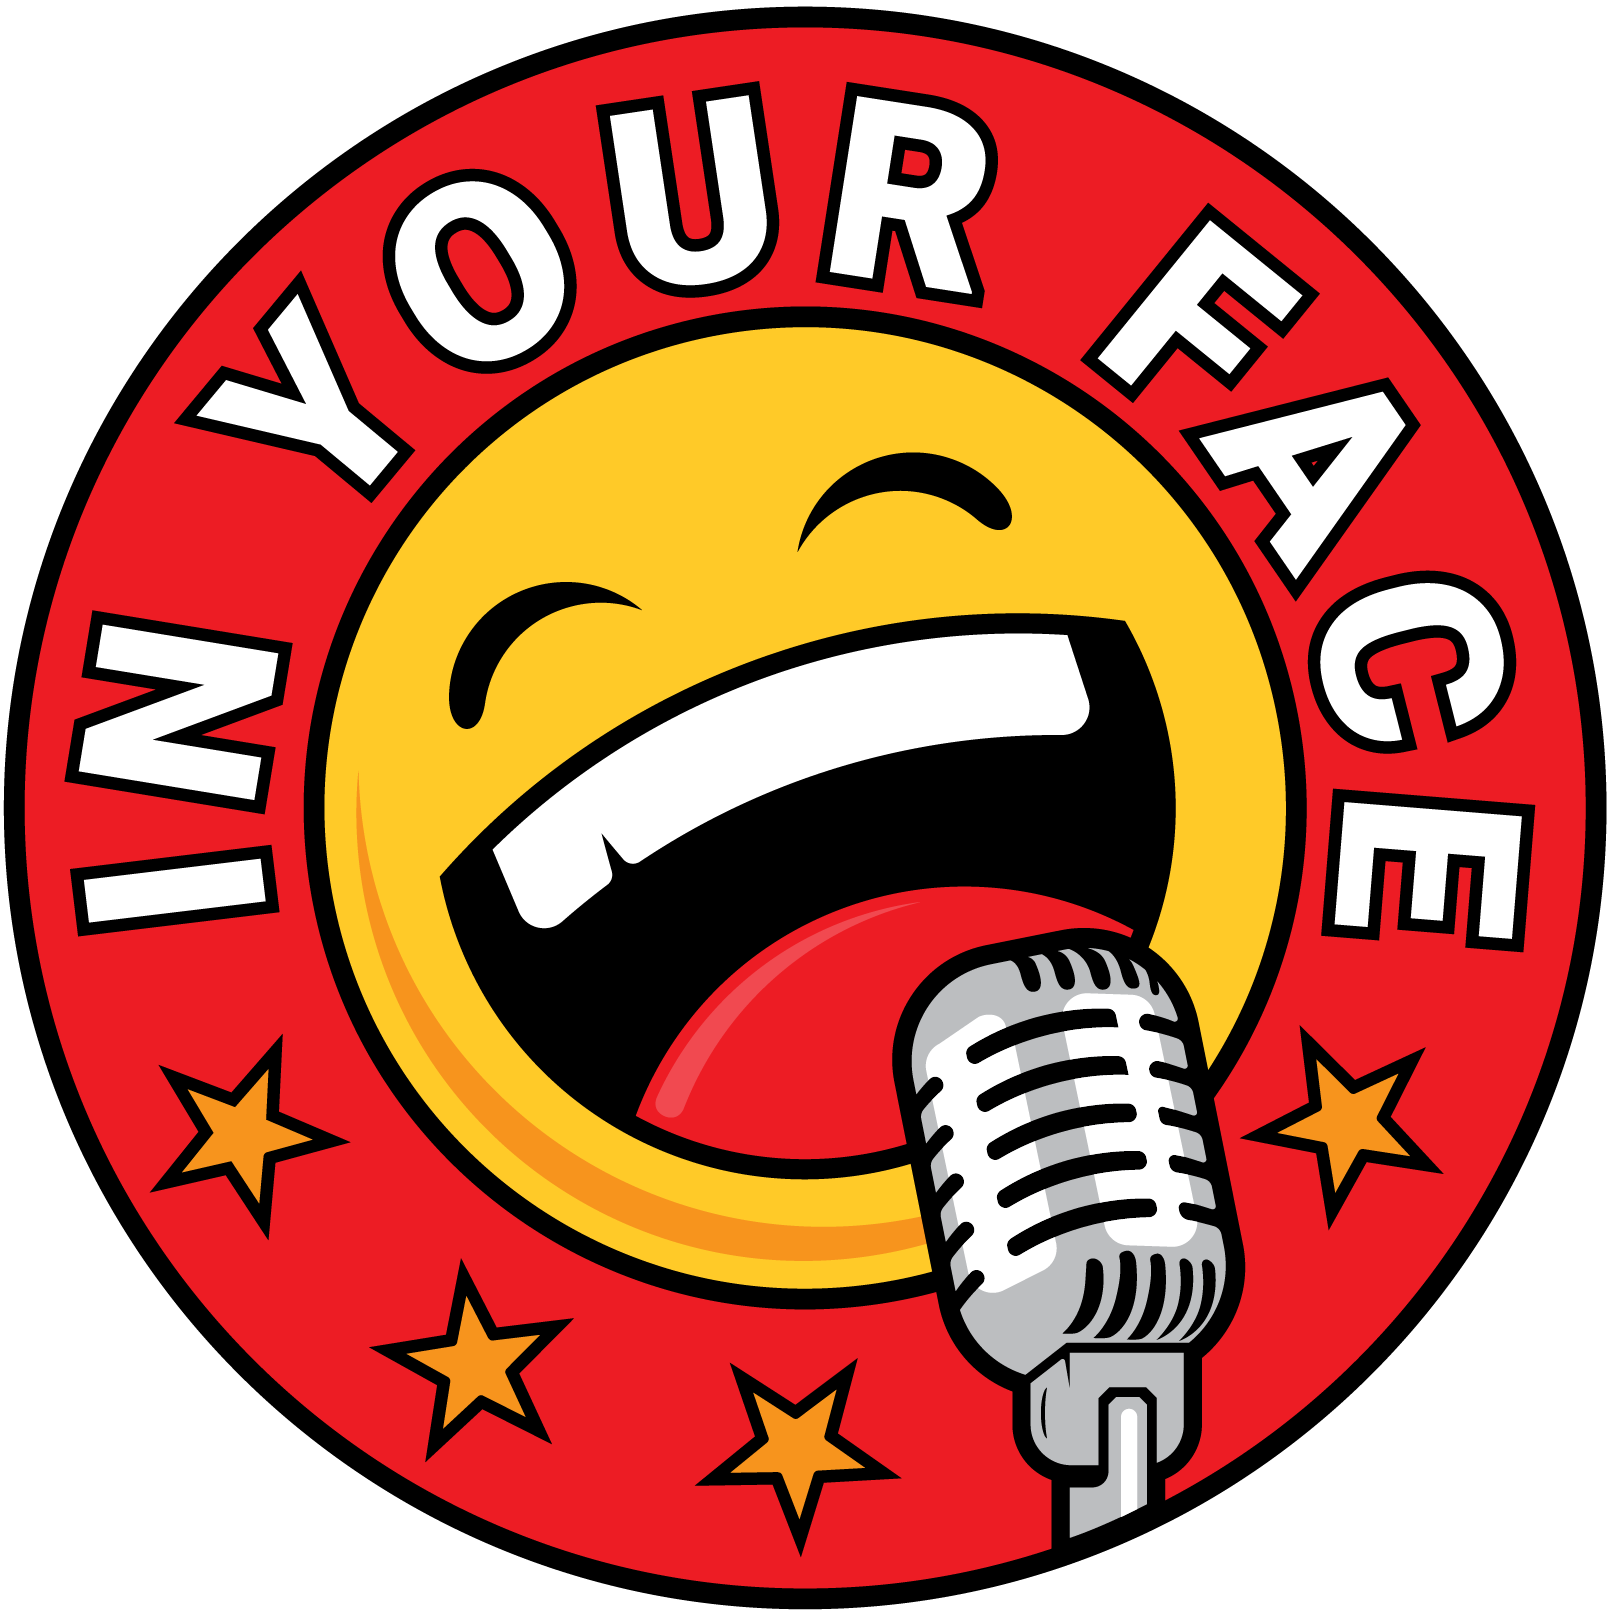 IN YOUR FACE logo